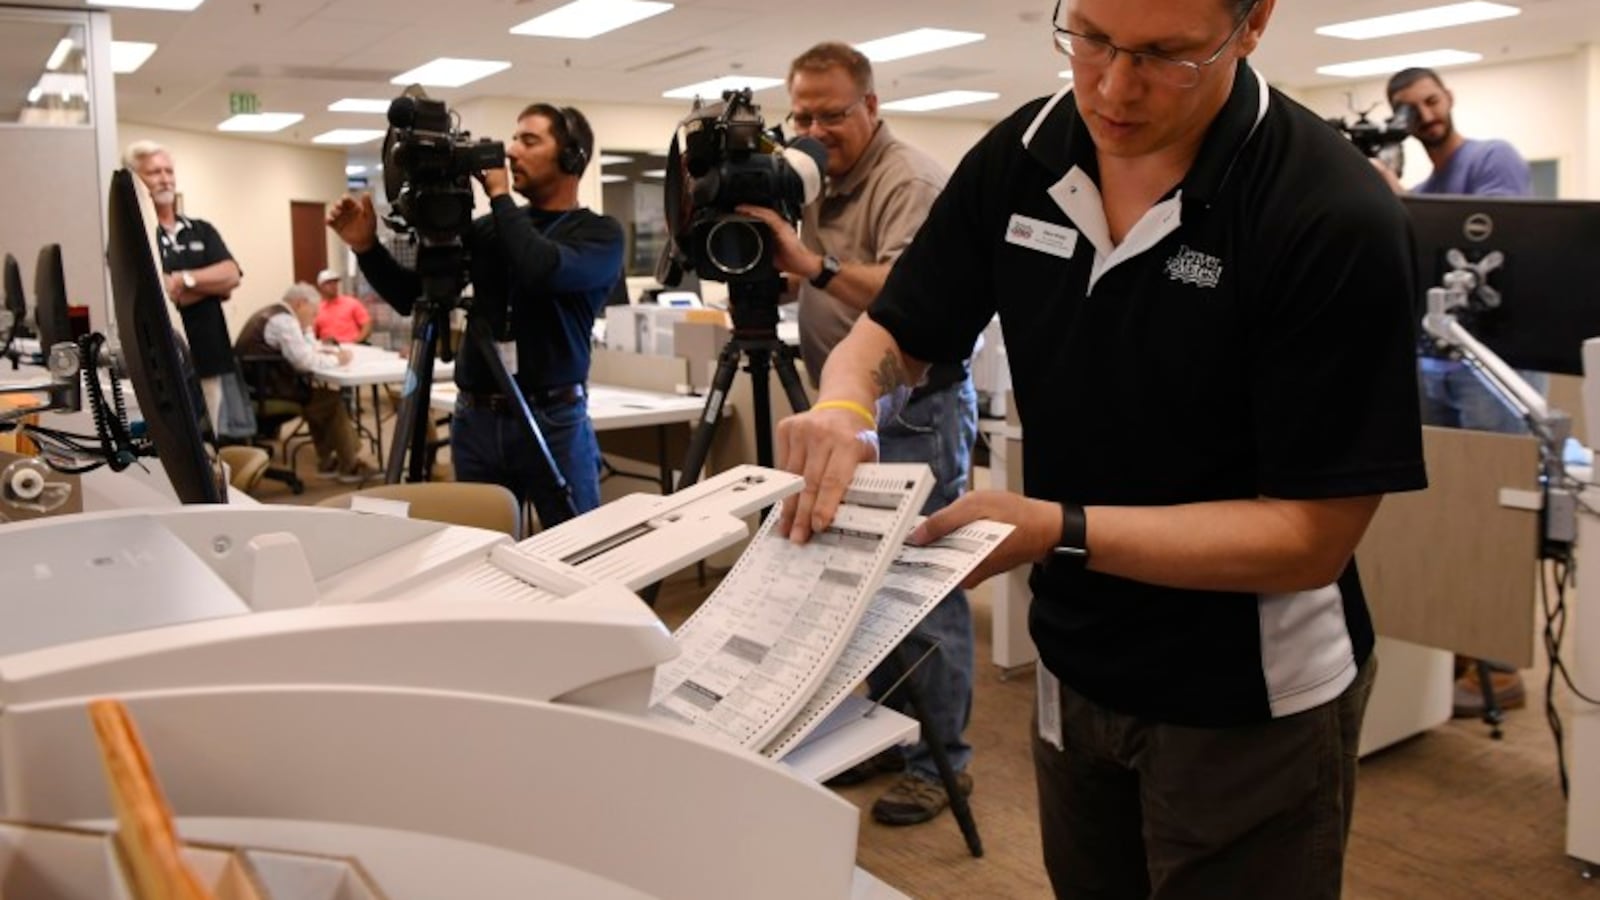 A test ballot run at the Denver Elections headquarters in October  (Photo by Andy Cross/The Denver Post).